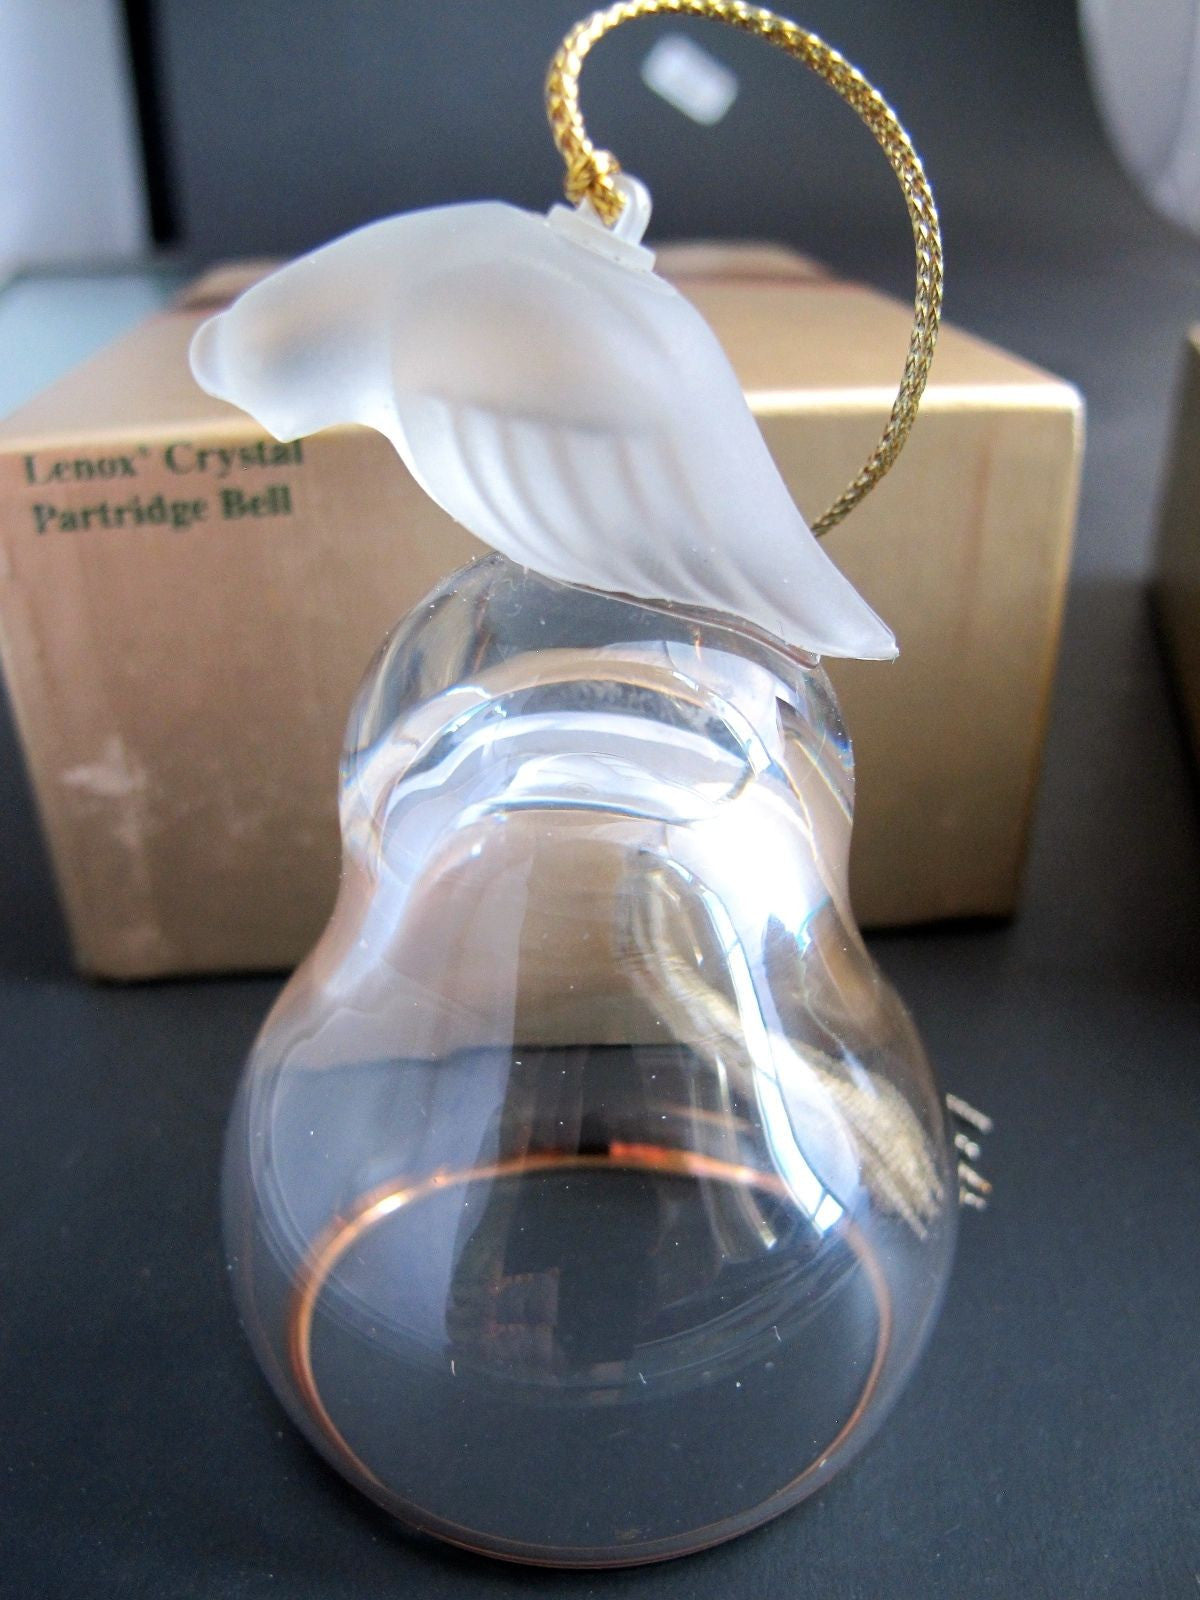 Lenox Crystal Partridge  miniature bell ornament Hand blown Made in USA - O'Rourke crystal awards & gifts abp cut glass